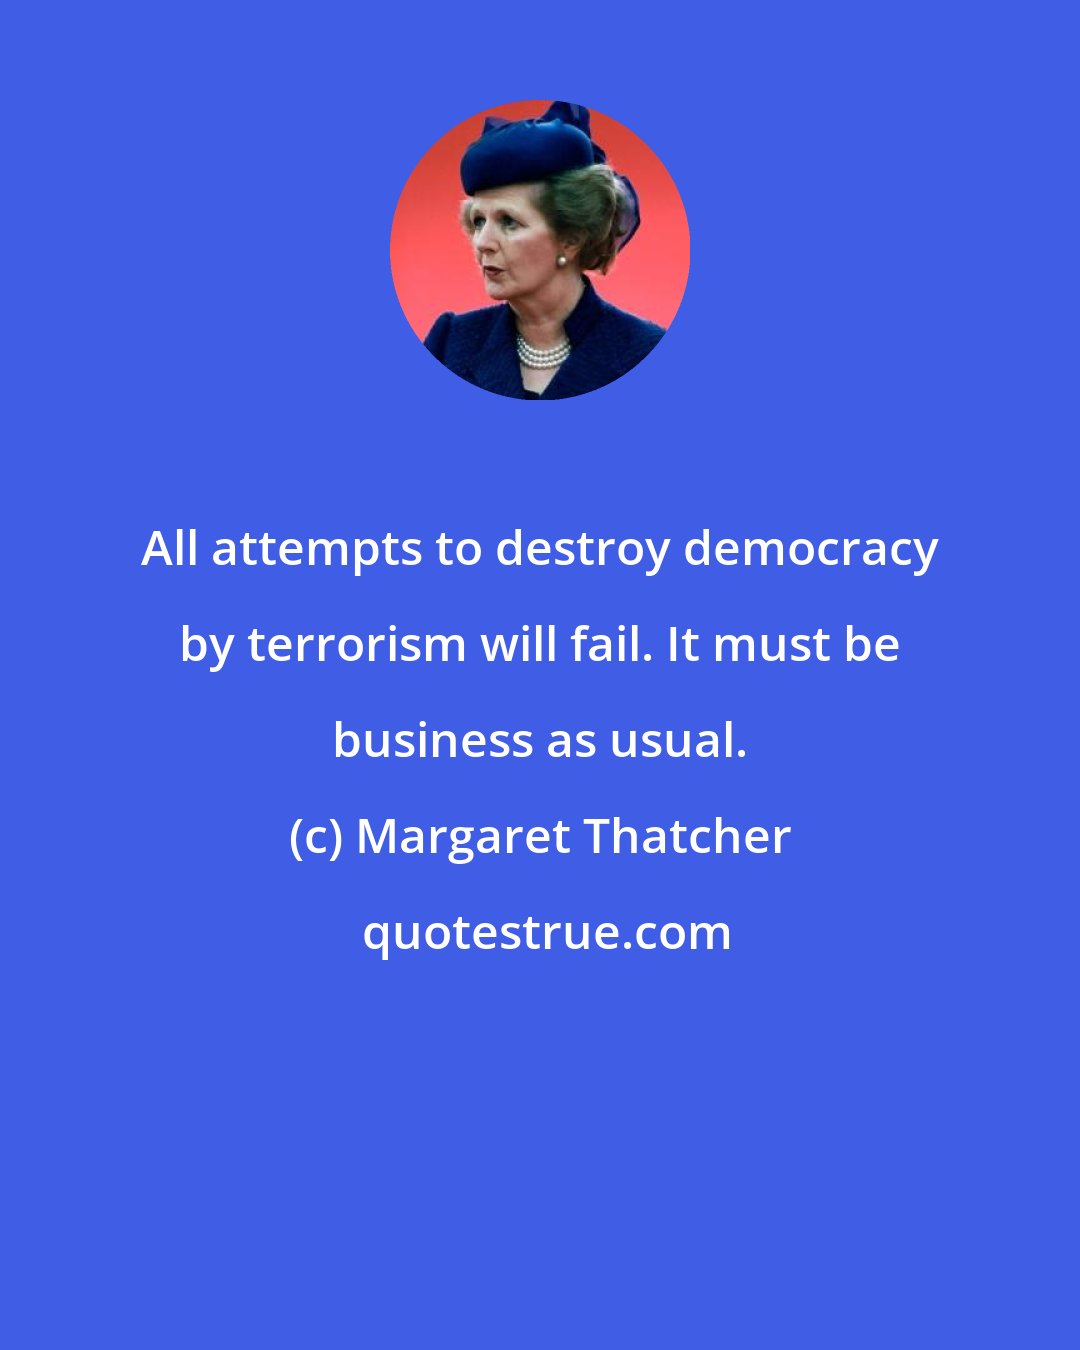 Margaret Thatcher: All attempts to destroy democracy by terrorism will fail. It must be business as usual.